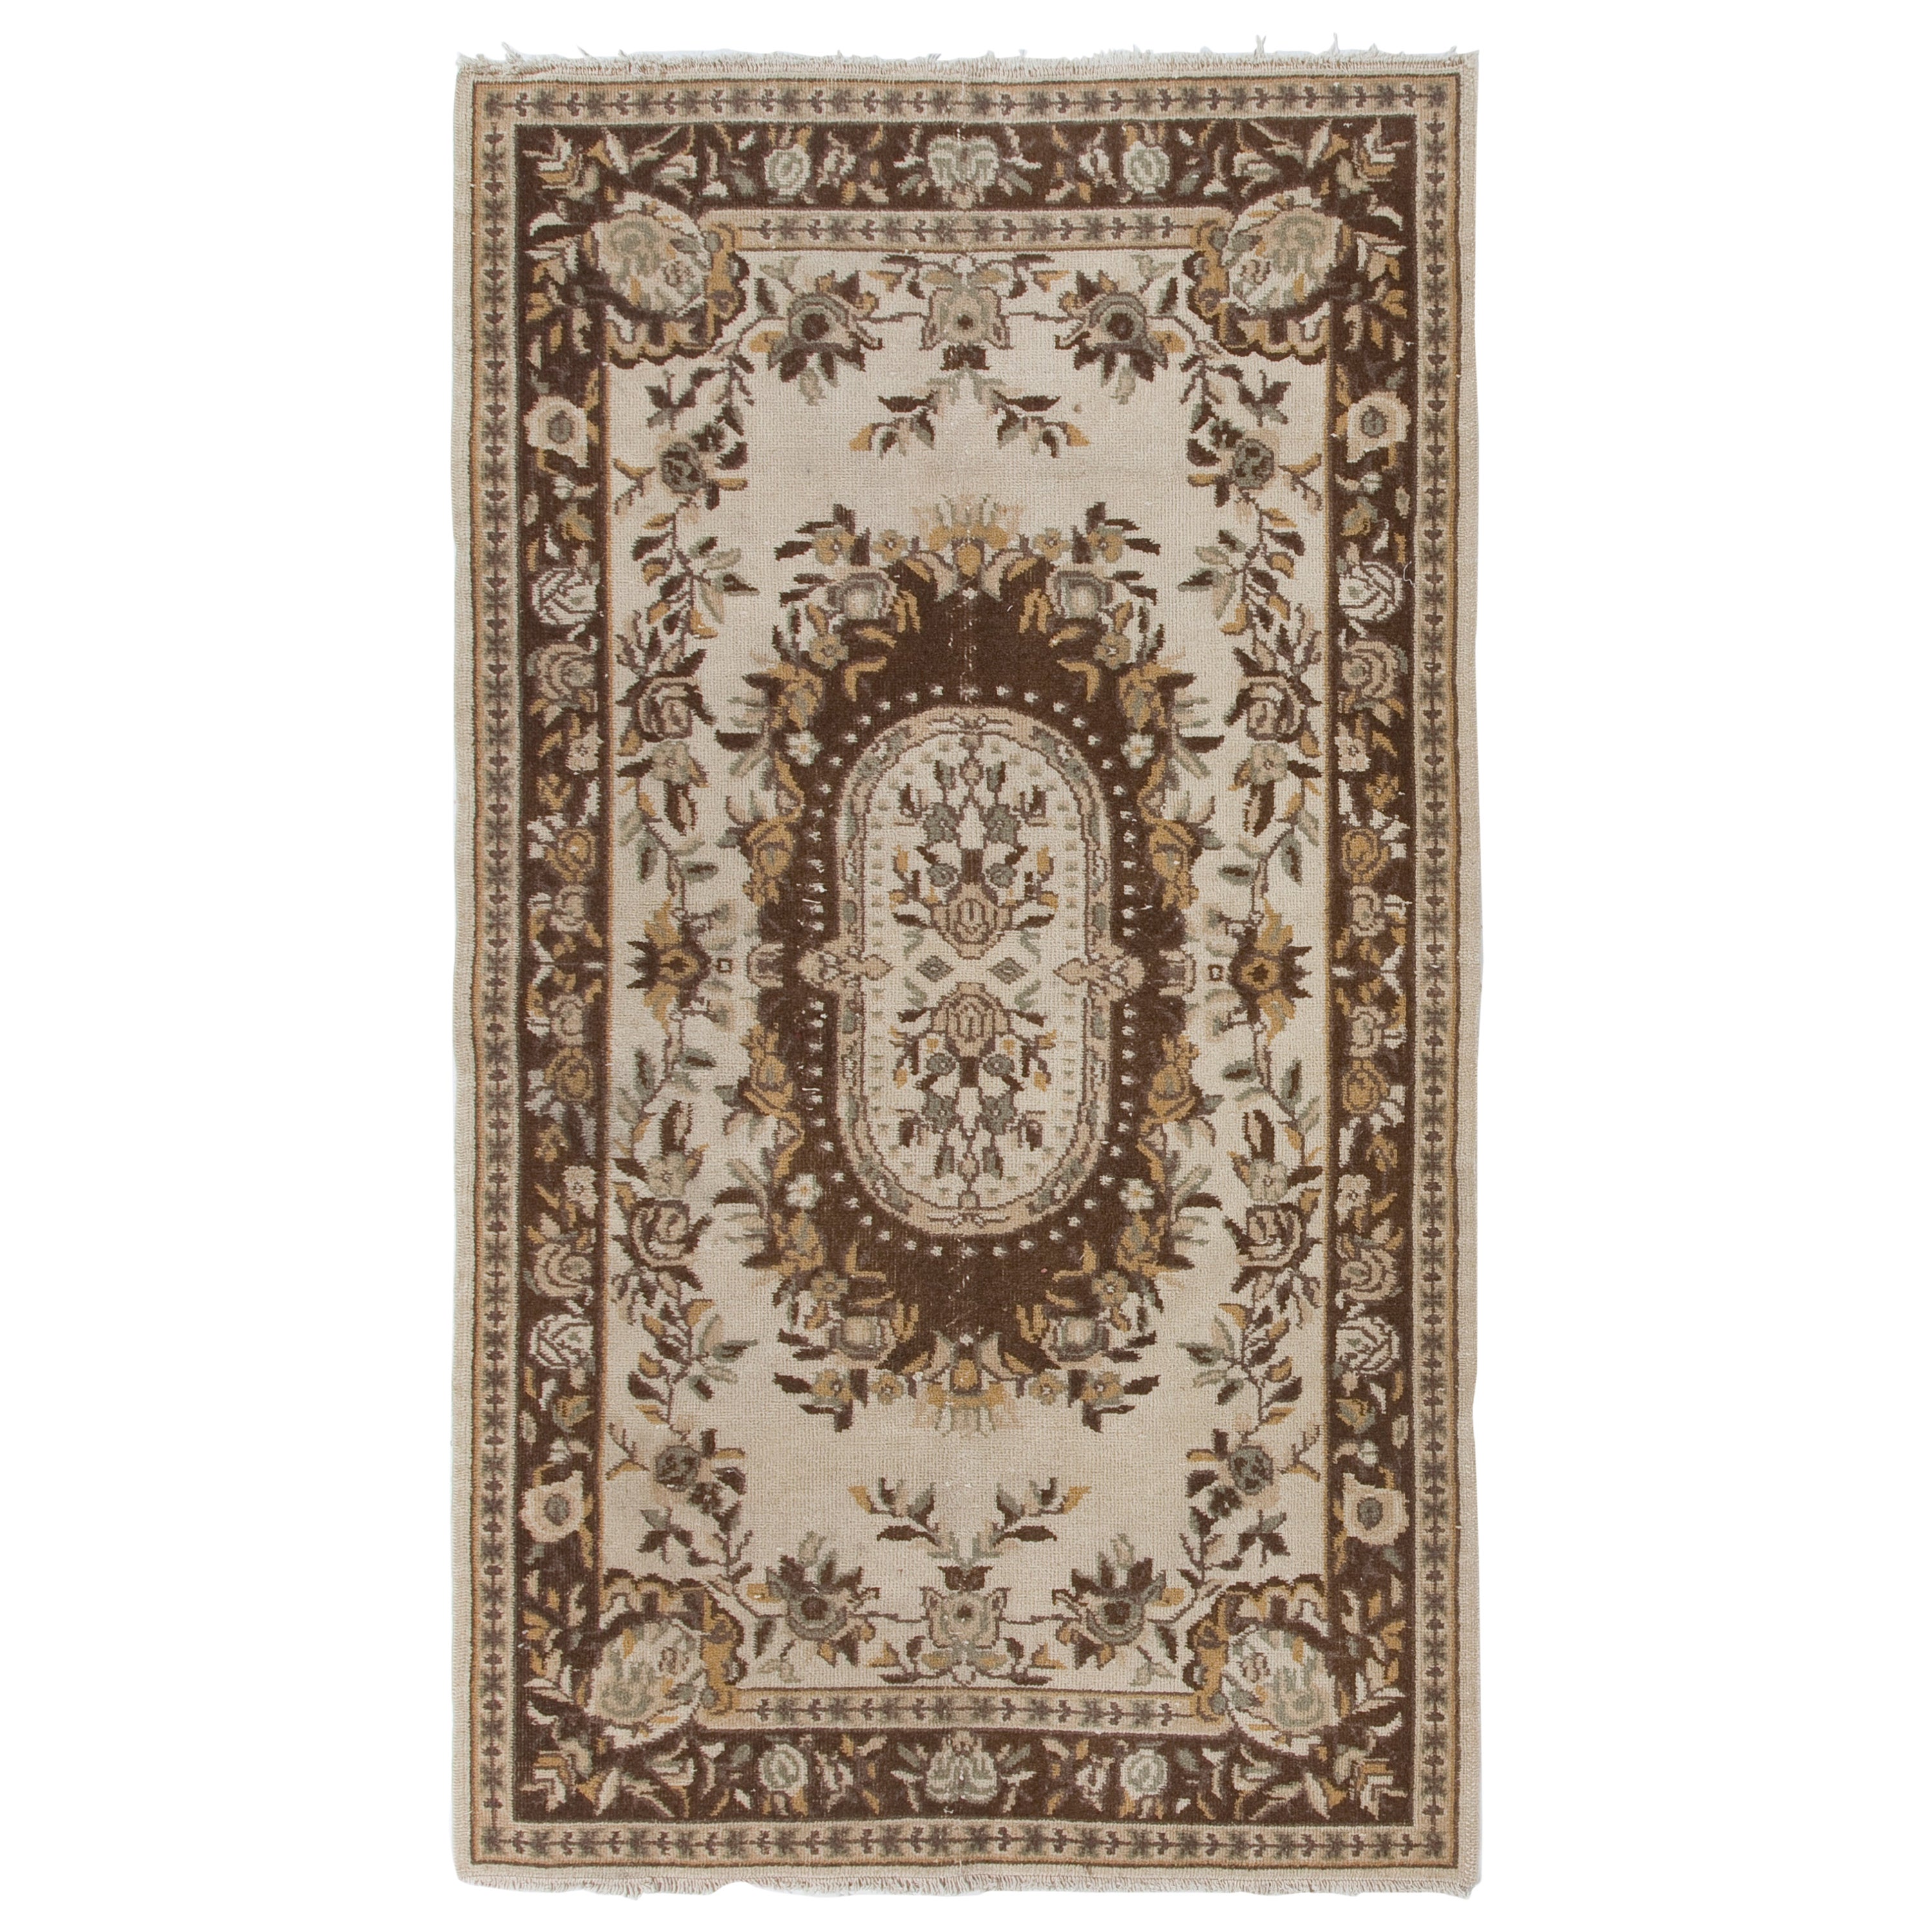 4x7 Ft Handmade Floral Design Anatolian Accent Rug in Beige, Brown & Rust Colors